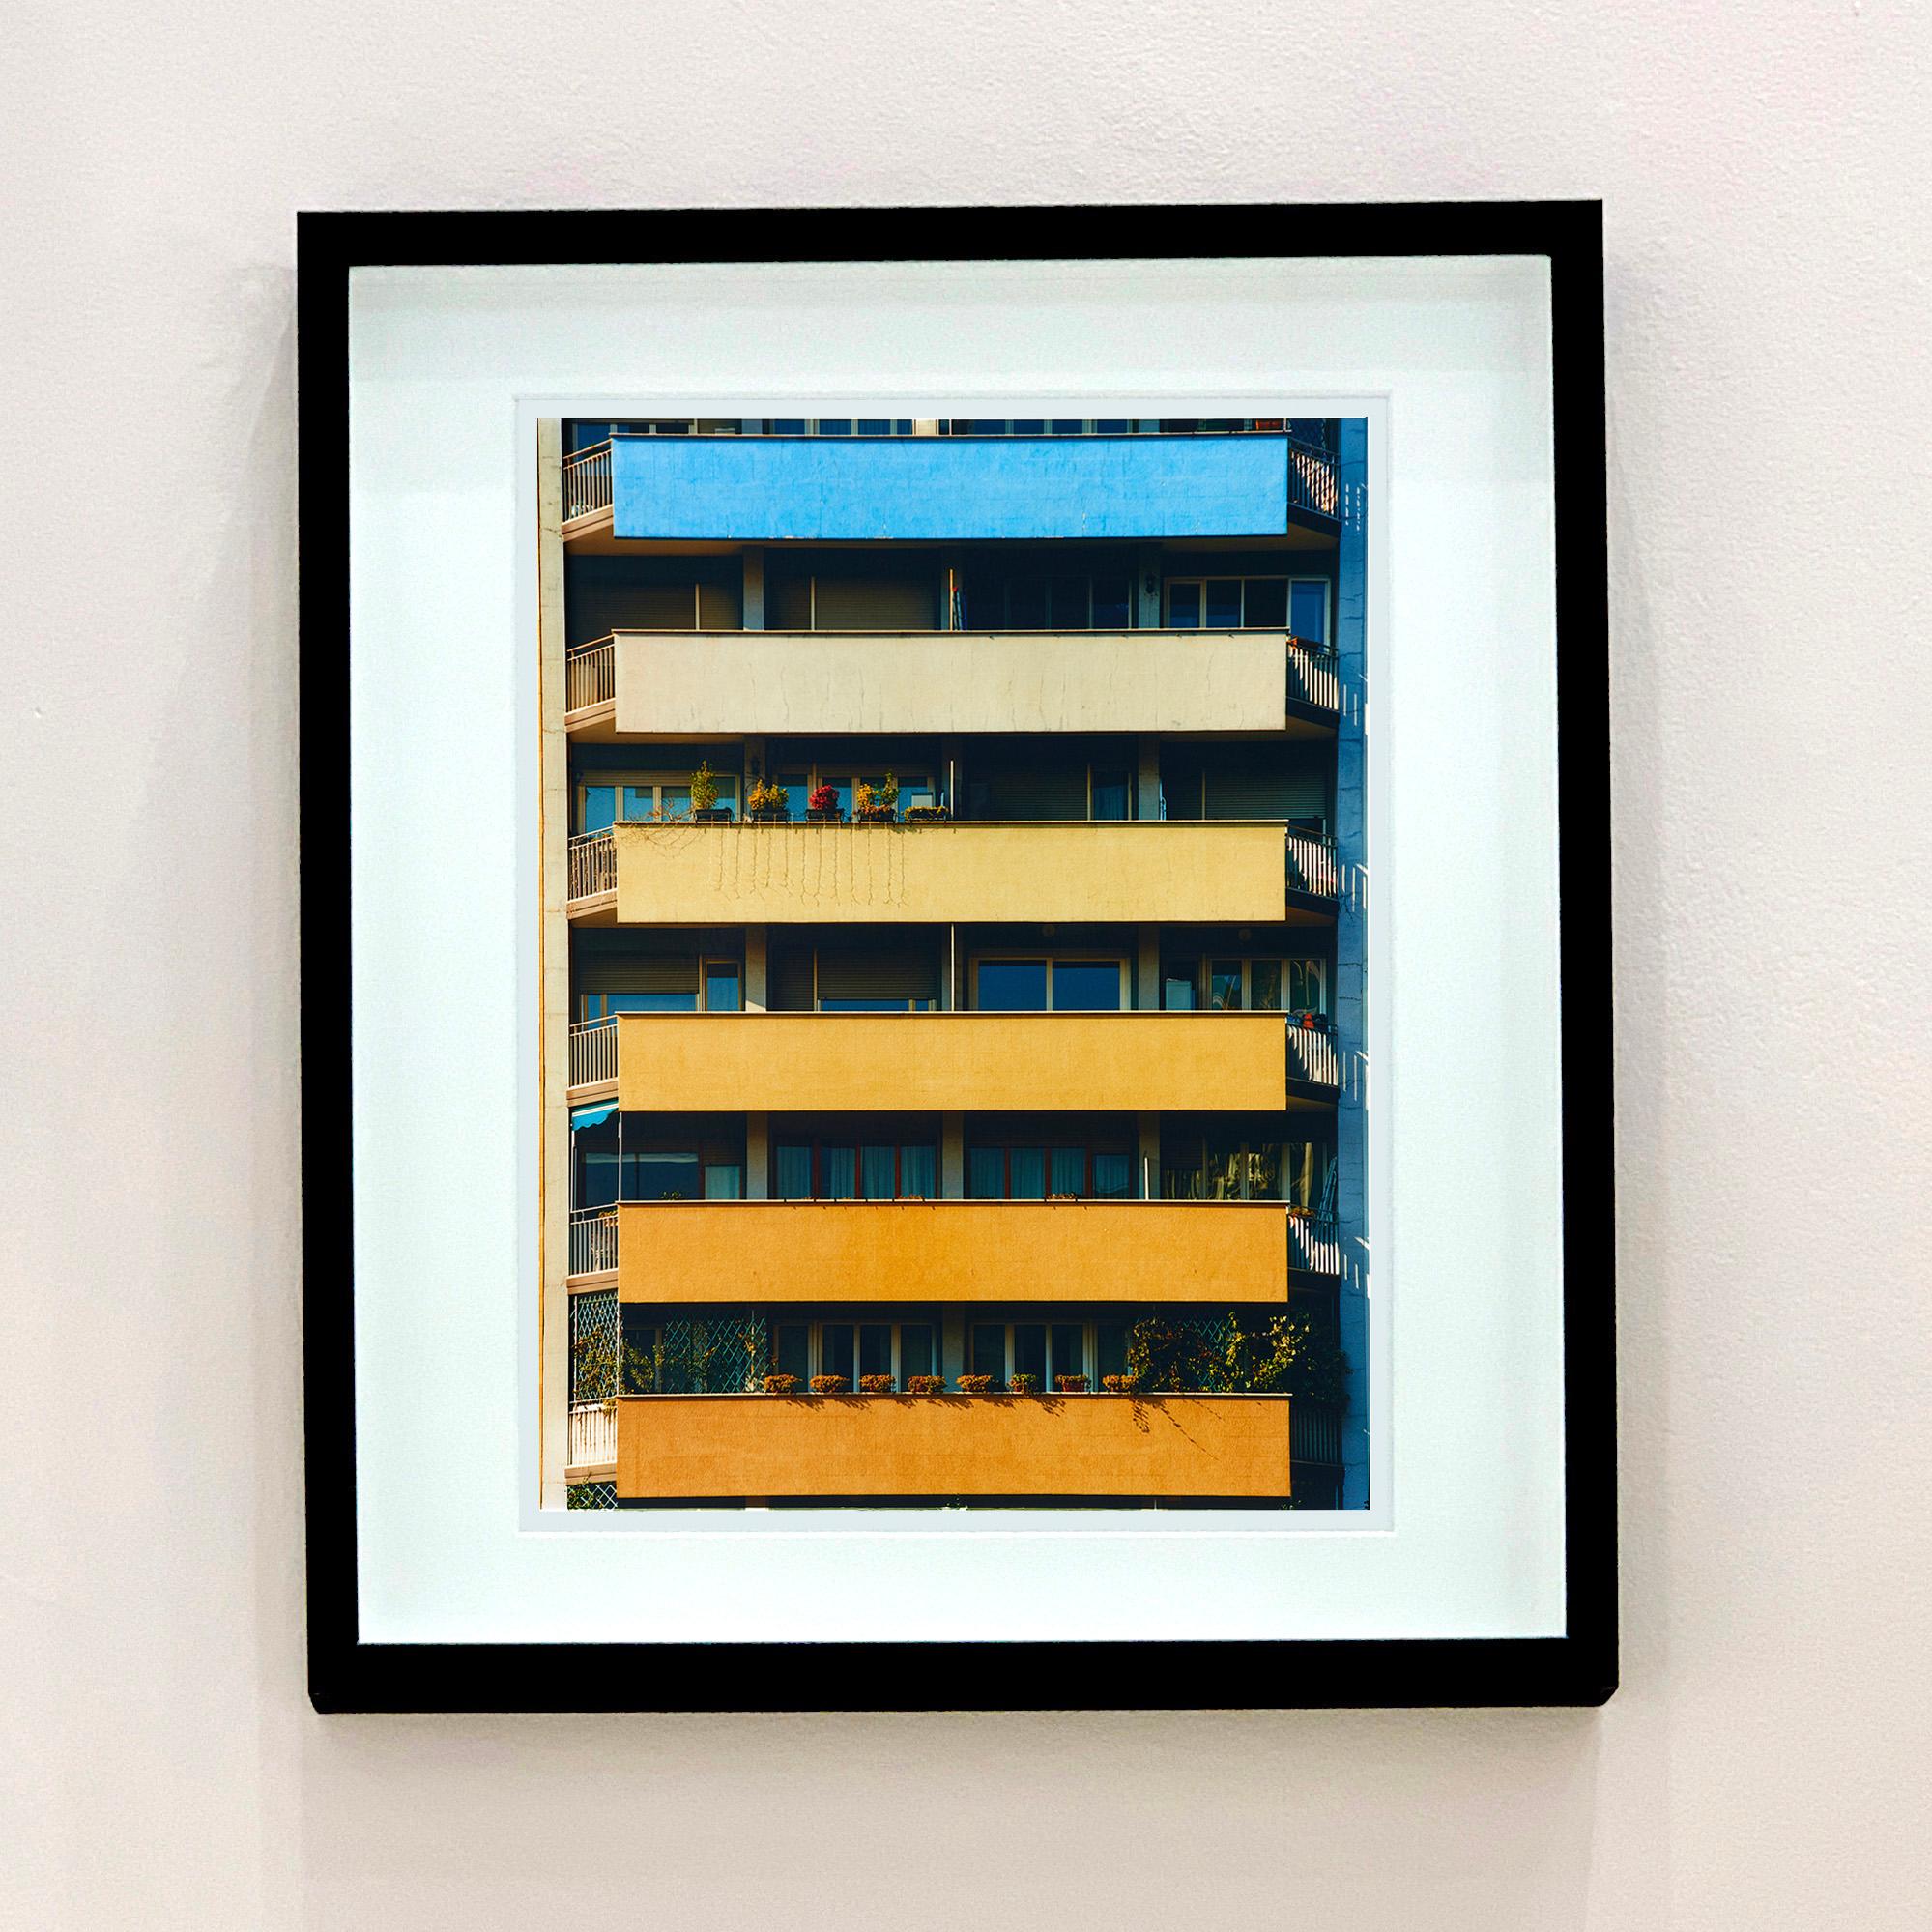 Rainbow Apartments, Italian architecture photograph from Richard Heeps series A Short History of Milan. 

A Short History of Milan' began in November 2018 for a special project featuring at the Affordable Art Fair Milan 2019 and the series is